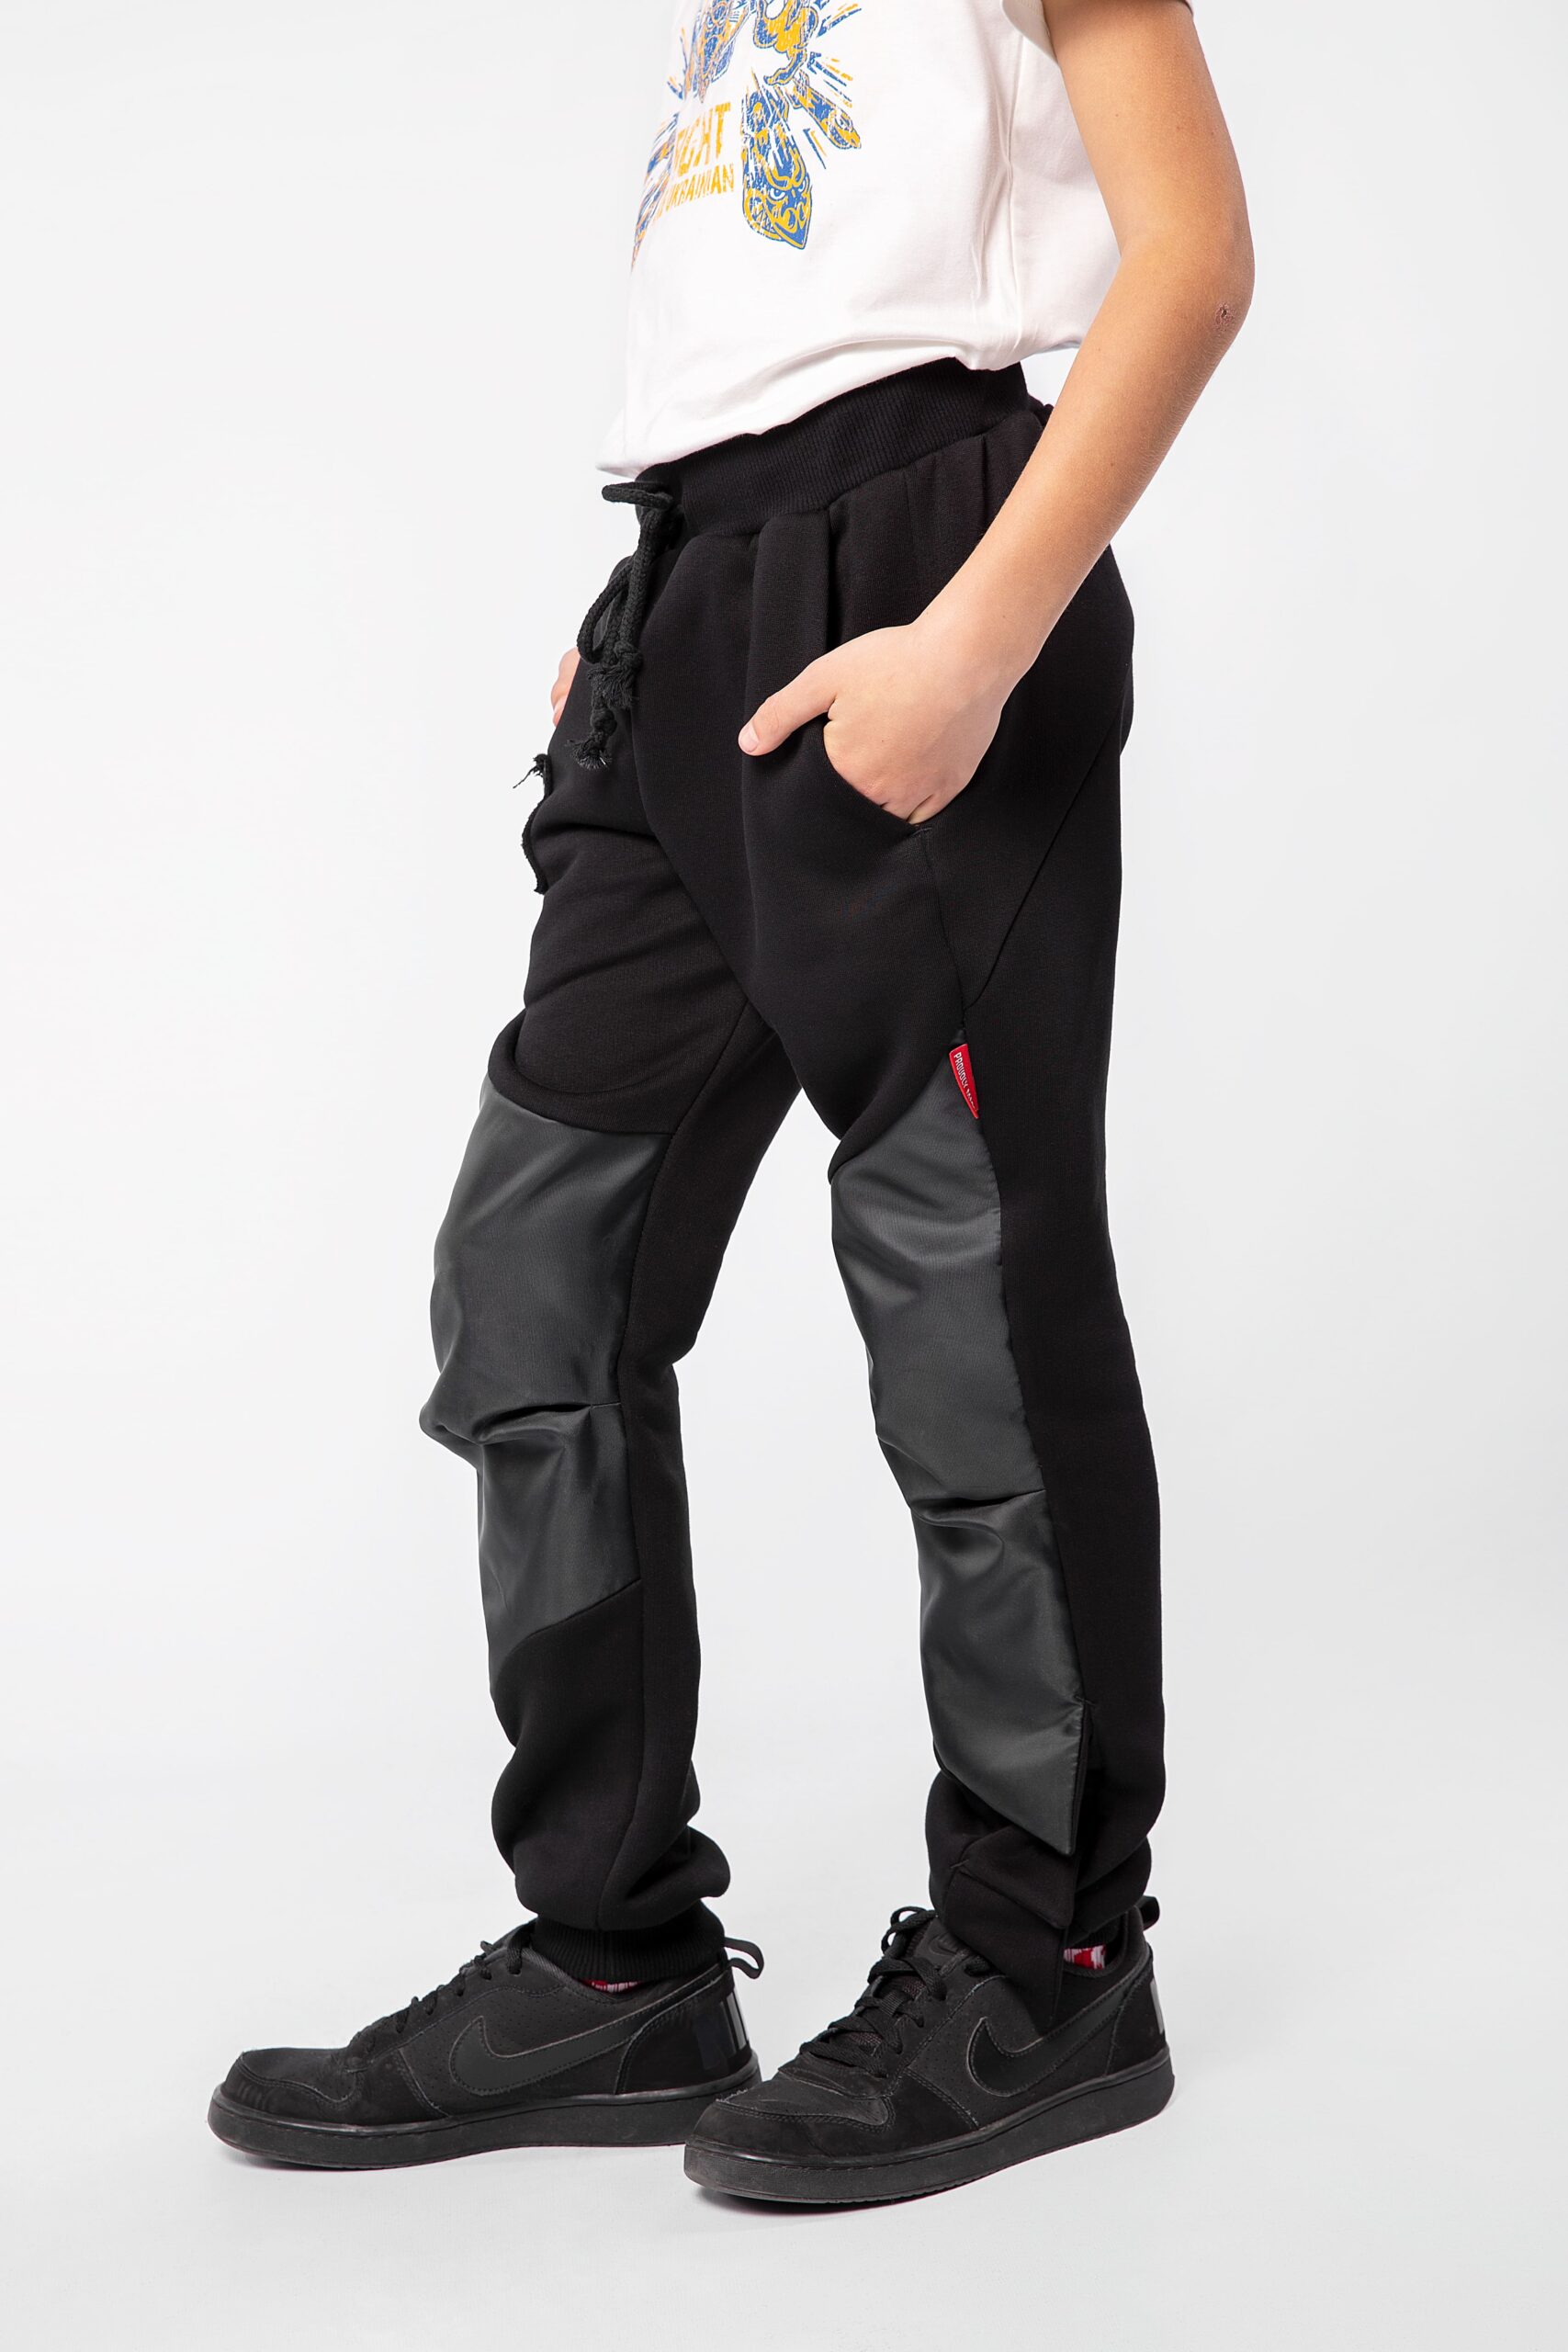 Kids Pants Always Explore. Color black. 
Material of the inserts: raincoat fabric.